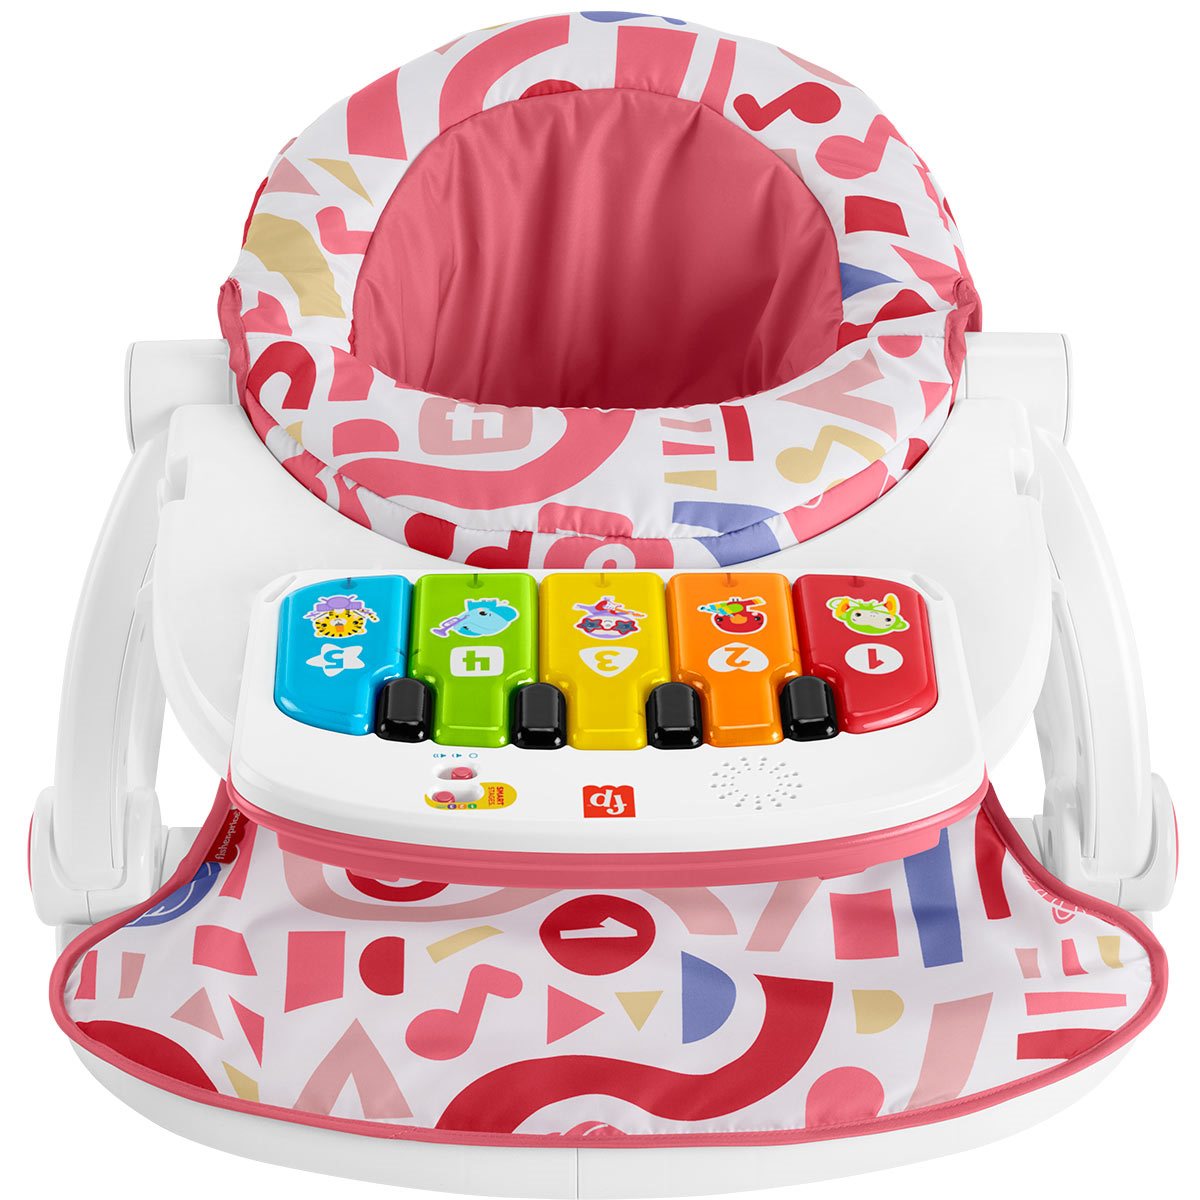 Fisher-Price Kick & Play Deluxe Sit-Me-Up Seat